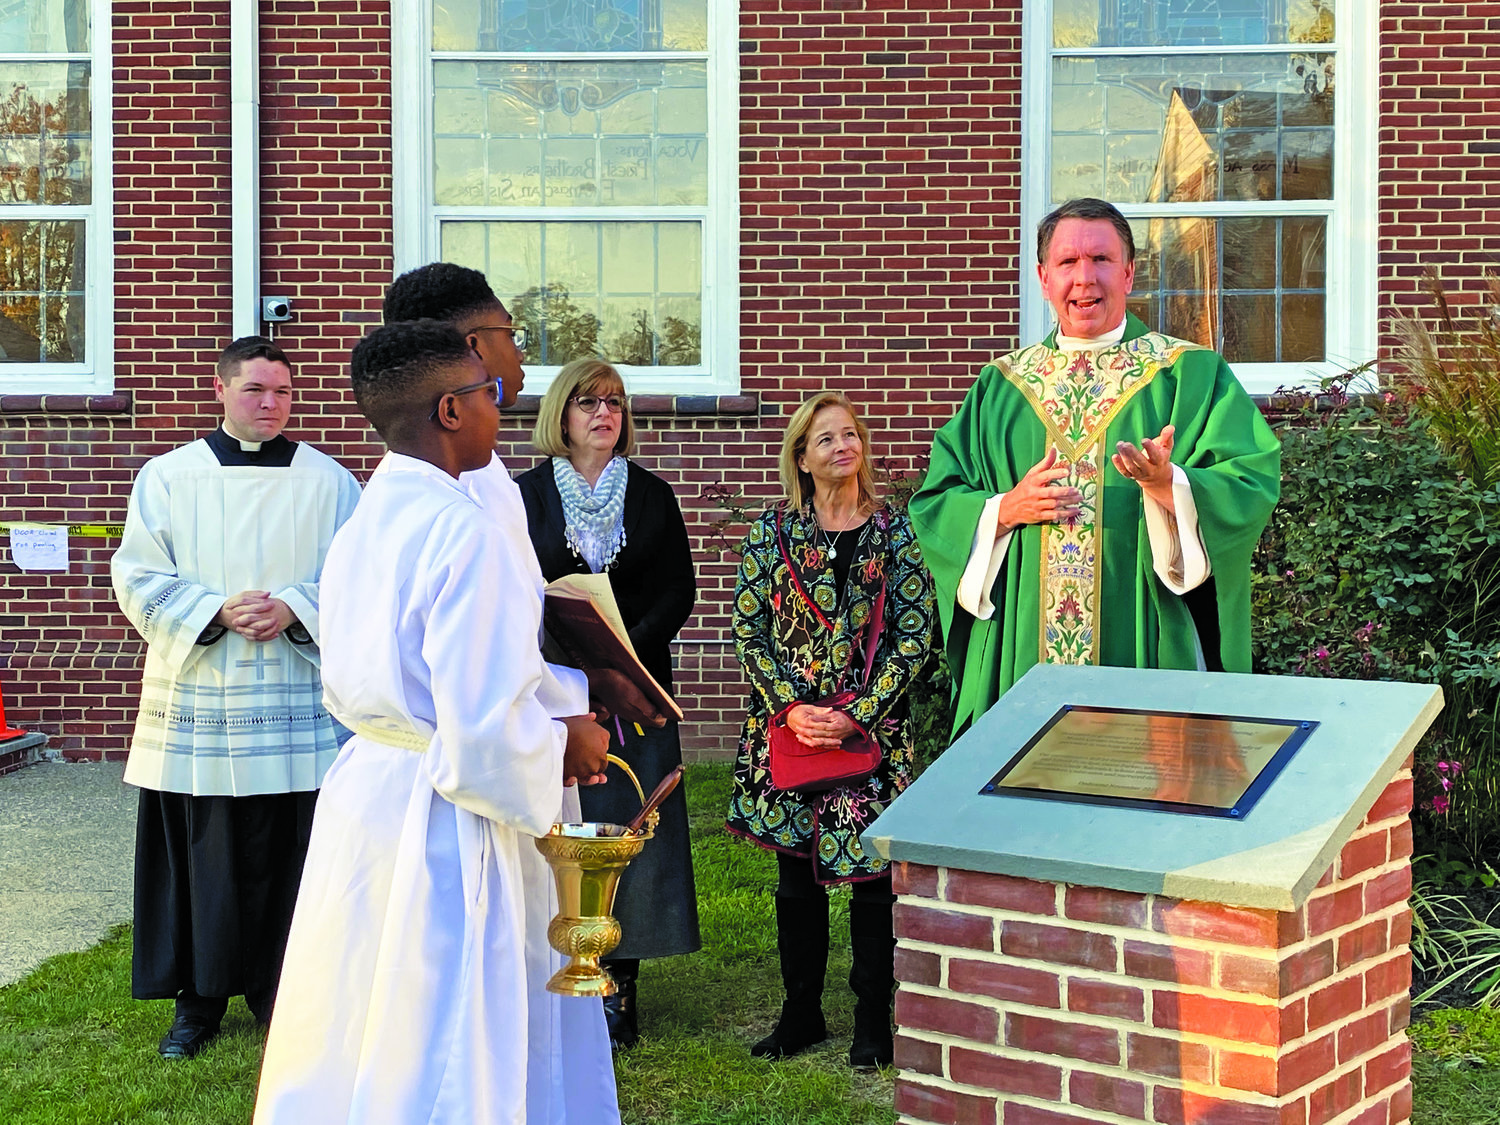 Back, from left, are: the Rev. Matthew D. Brody, parochial vicar; Cindy Balceniuk, director of religious education; Dawn Parker, school principal; the Rev. Matthew W. Guckin, pastor. In the foreground are: Jeremiah and Jason Ofori-Mensah, altar servers.